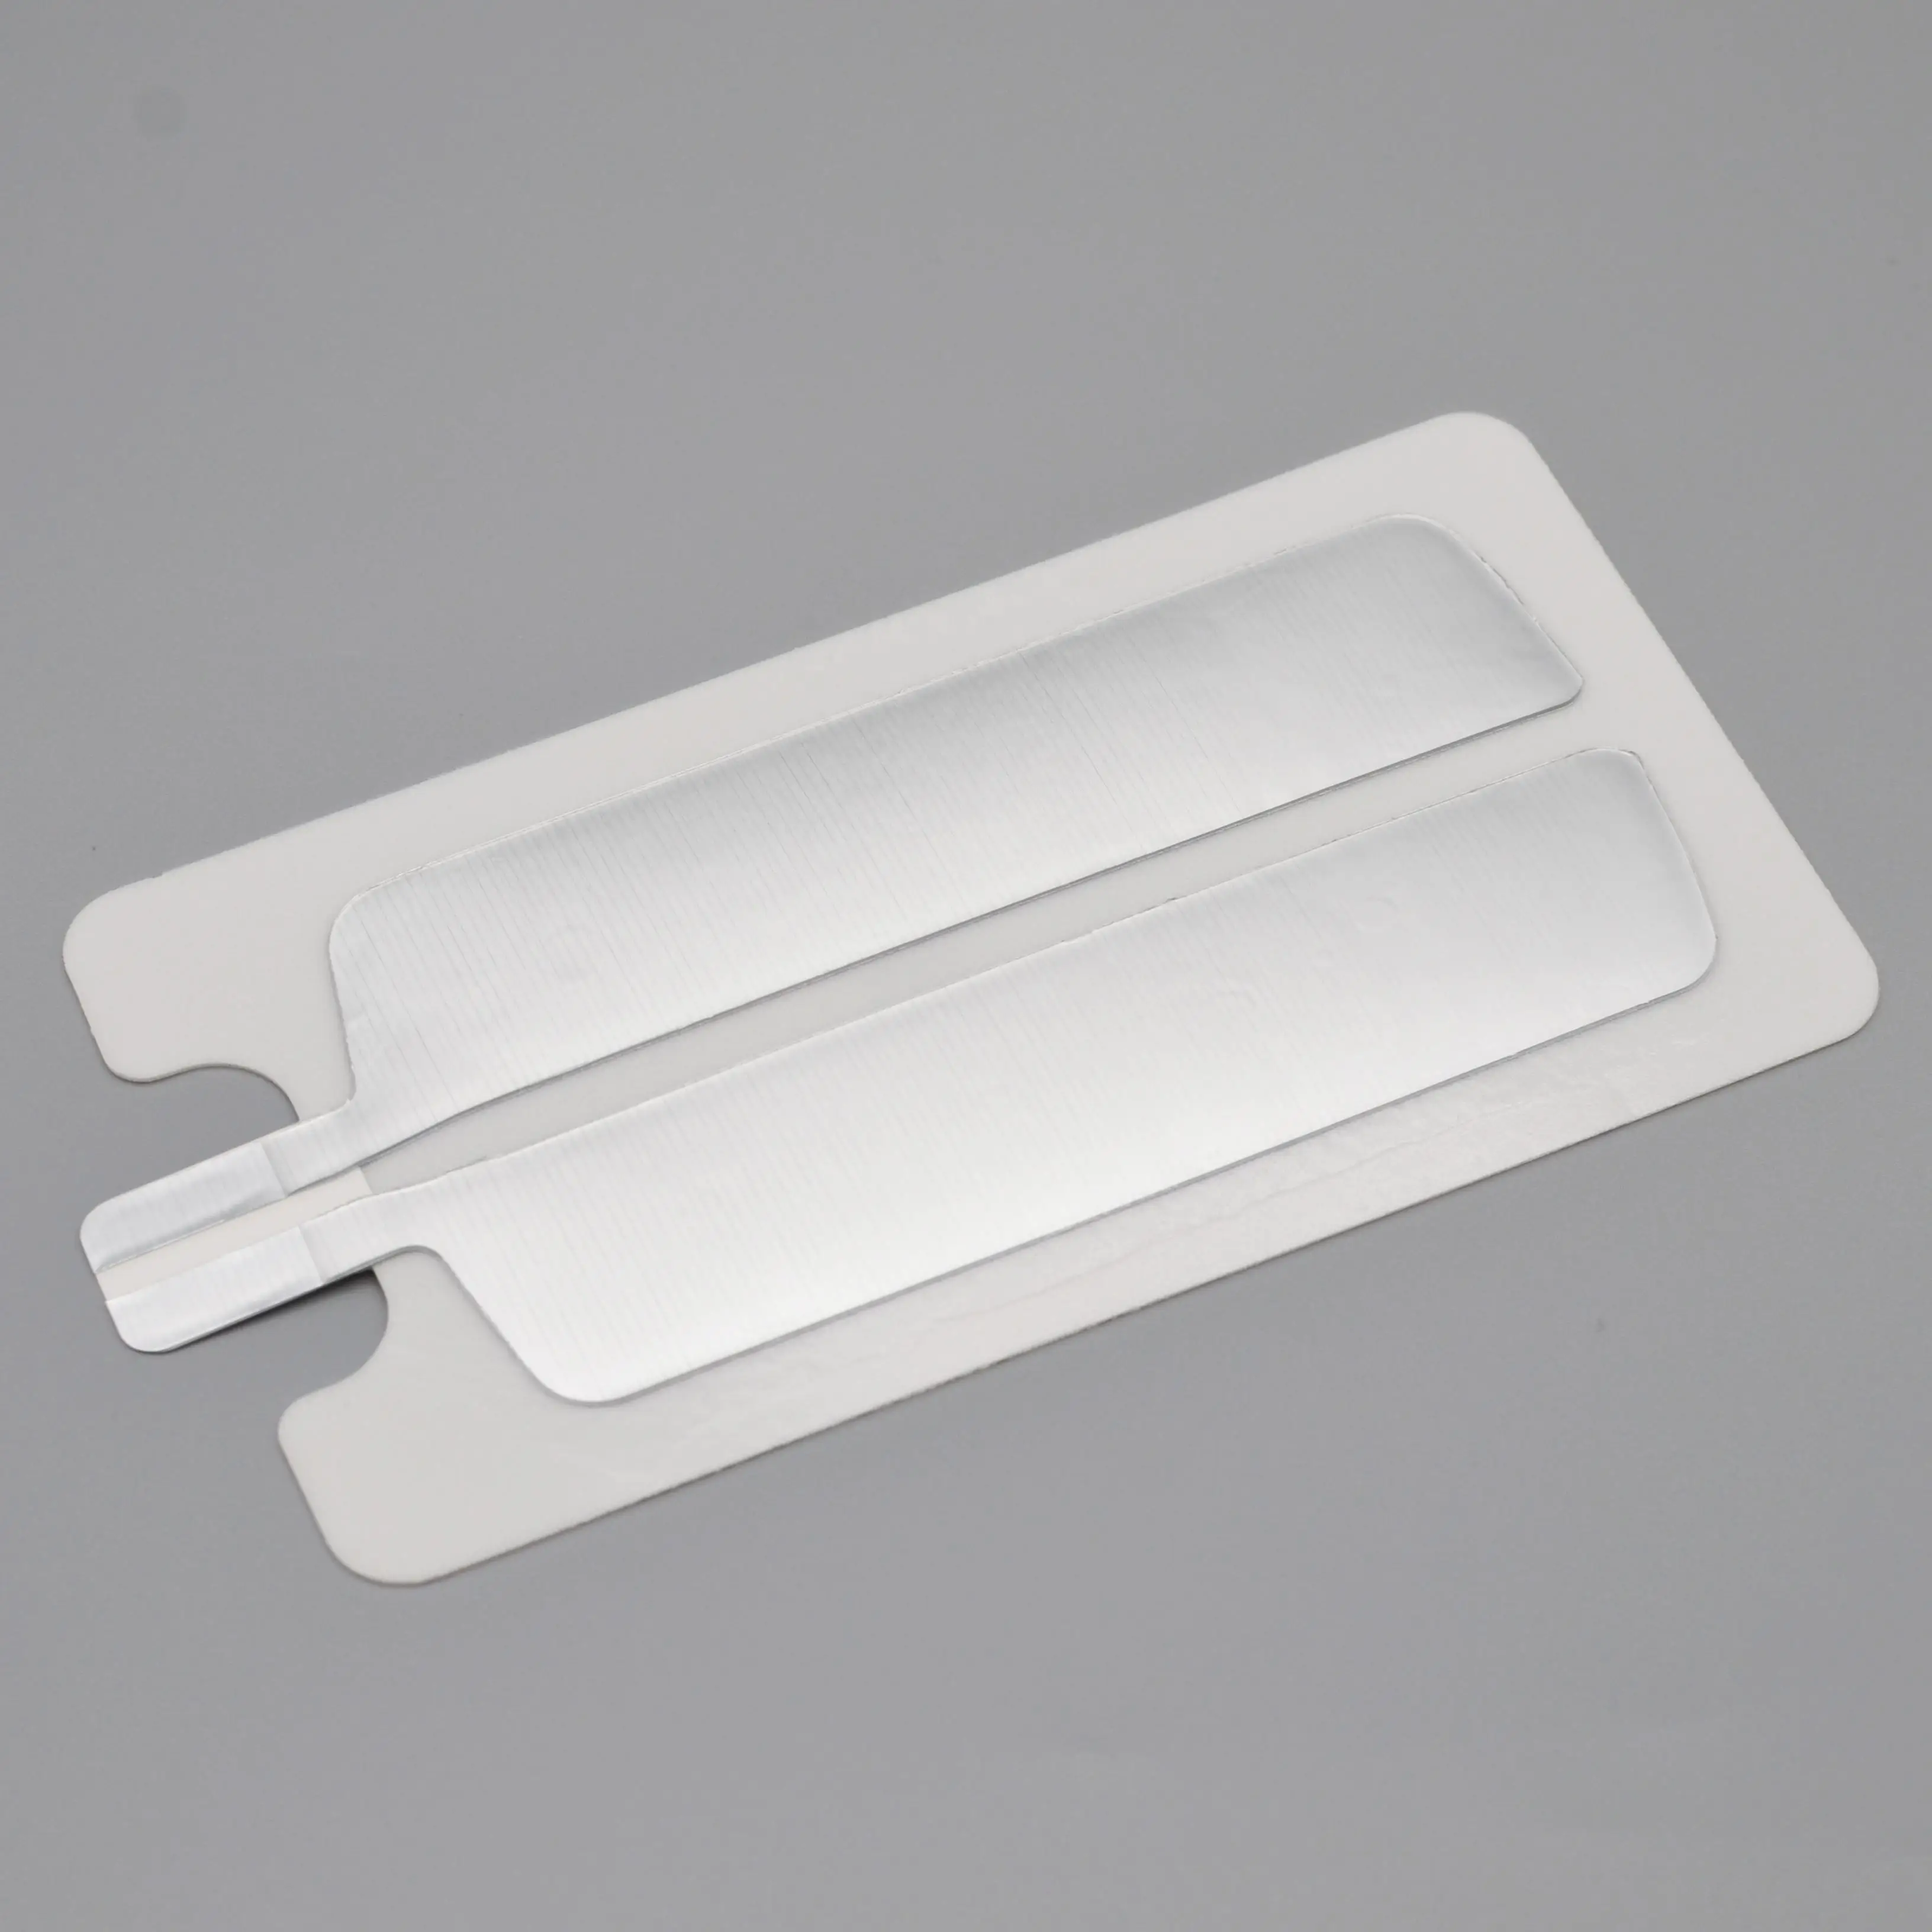 Hot Selling Neutral Bipolar Negative Pad Disposable Electrosurgical Esu Grounding Pad 100pairs aa no 5 battery 14 12mm spring contact sheet battery box positive and negative negative positive bipolar battery